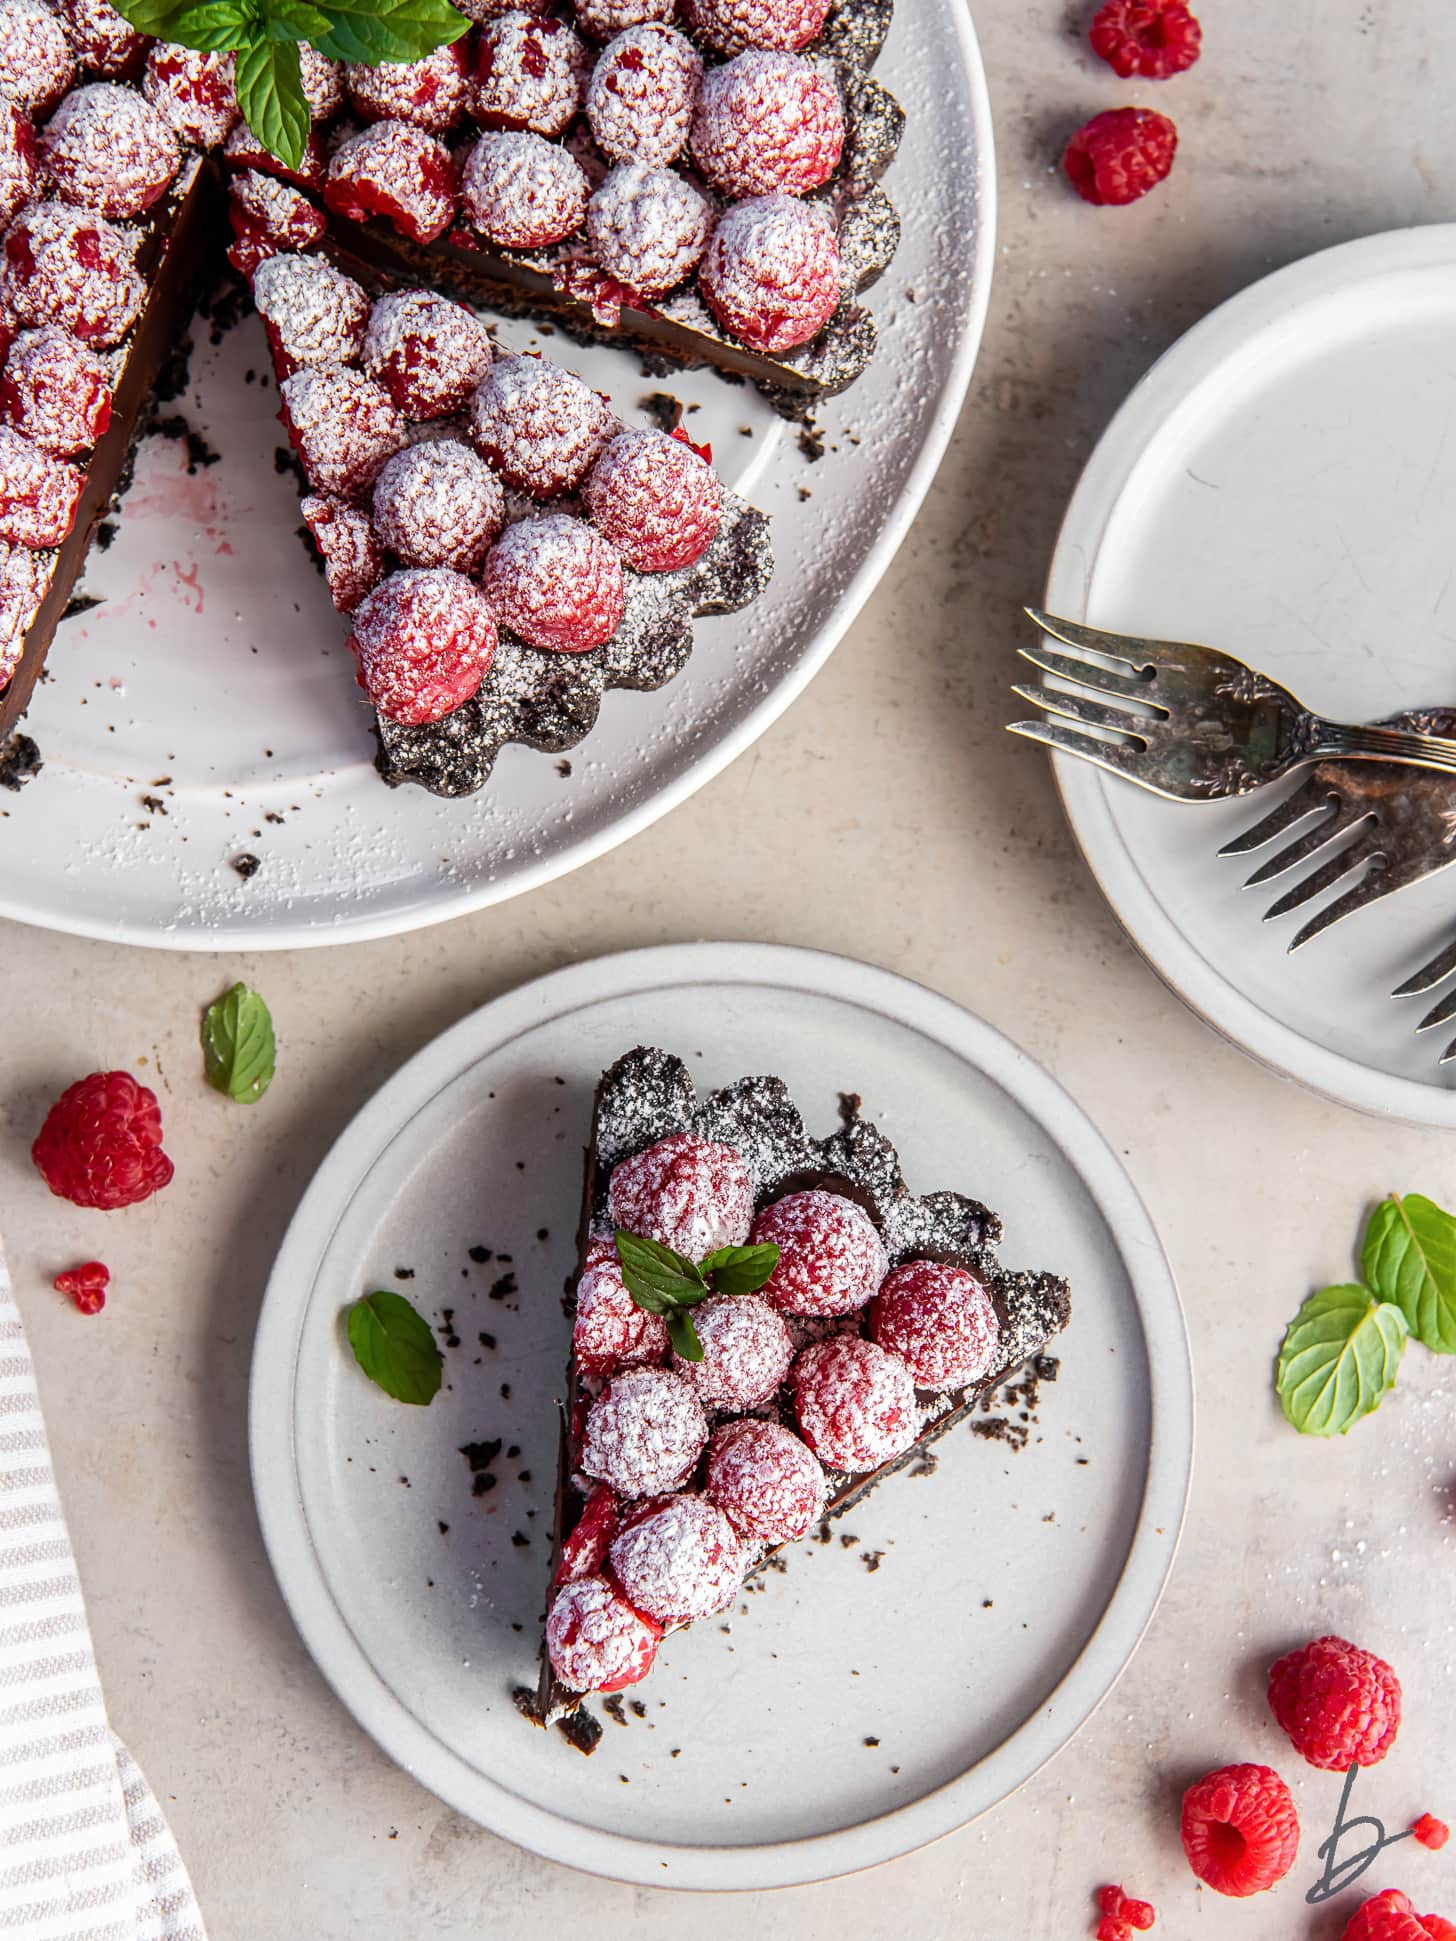 slice of chocolate raspberry tart on a plate next to the whole tart dusted with confectioners' sugar.